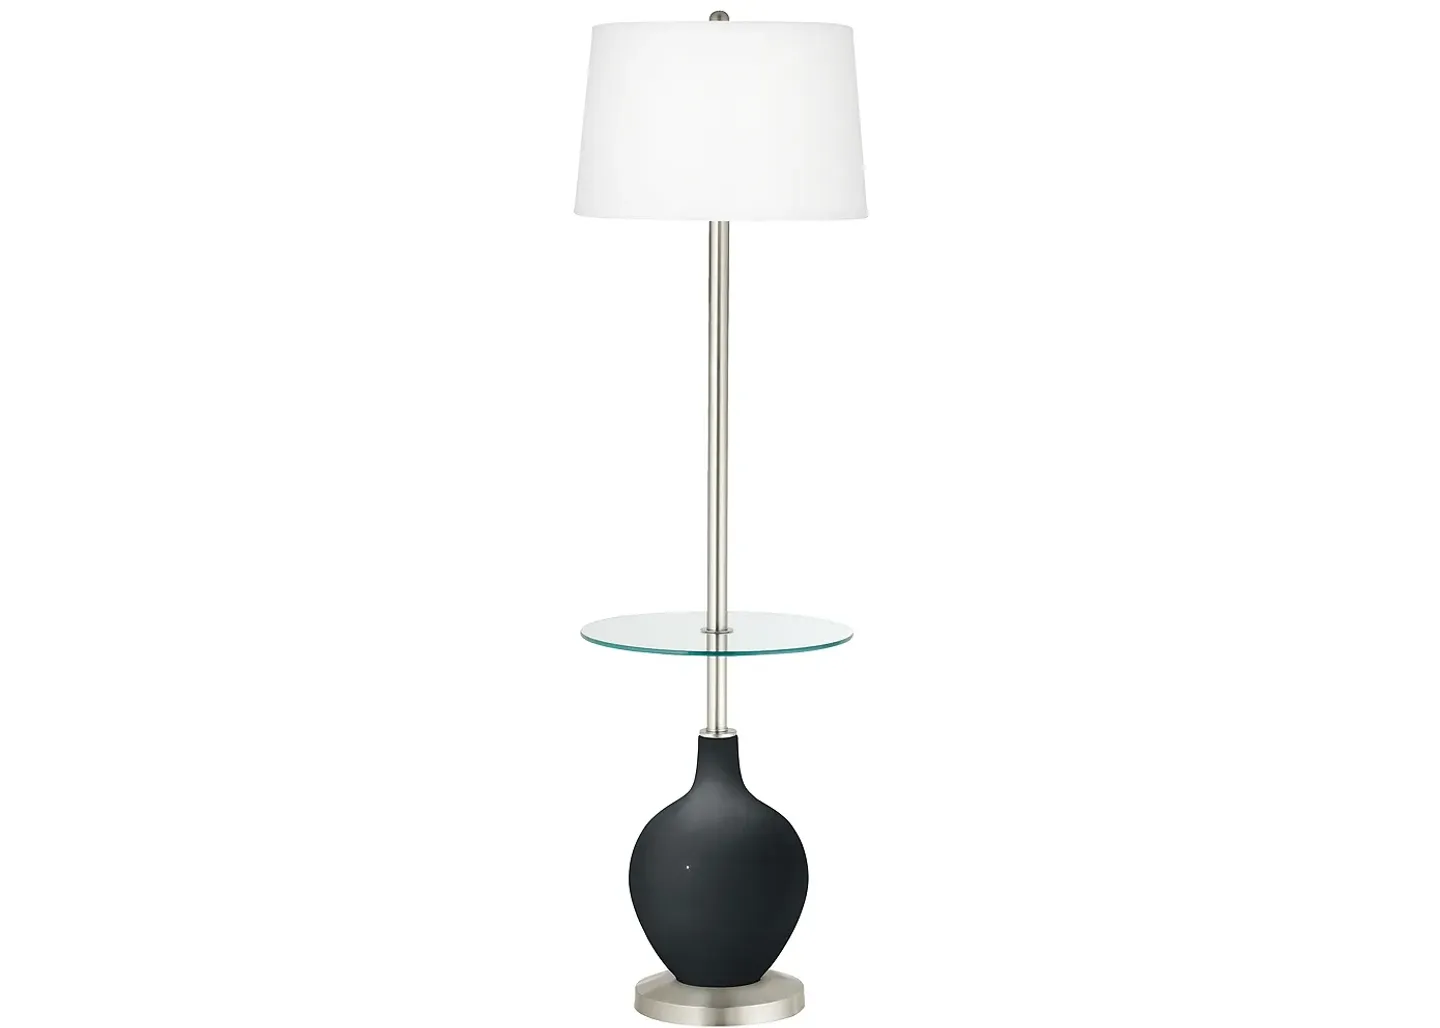 Color Plus Black of Night Ovo Tray Table Floor Lamp